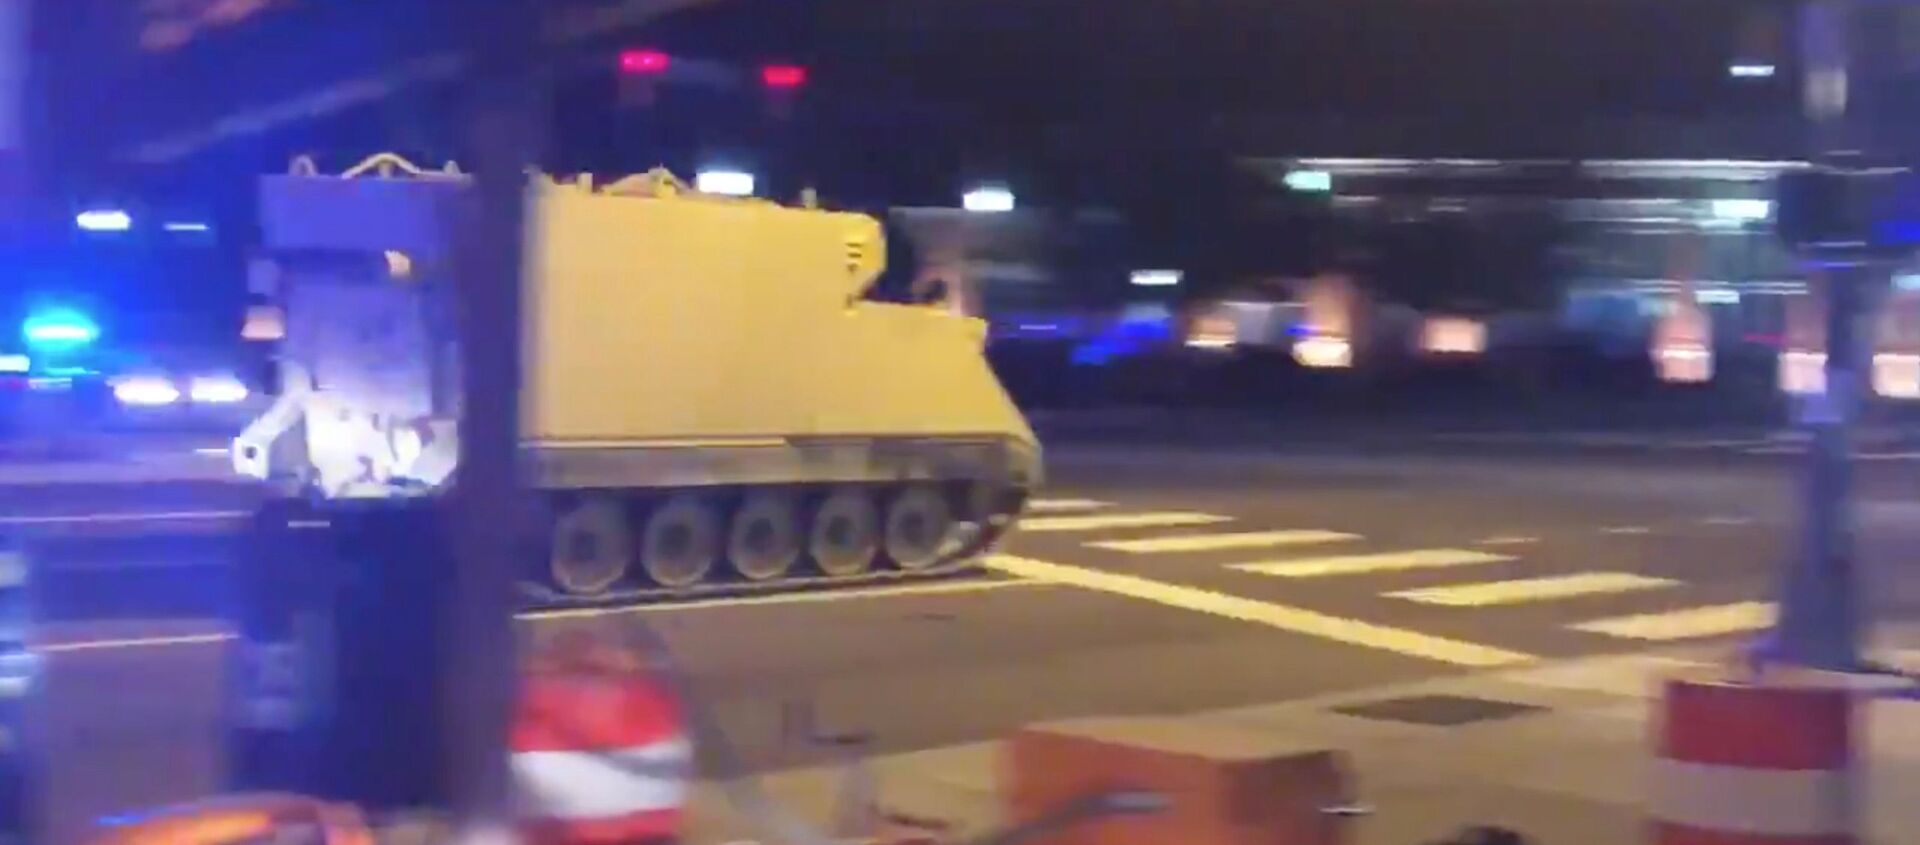 An armoured personnel carrier (APC), which was purpotedly stolen, drives along a street in Richmond, Virginia, U.S. June 5, 2018, in this still image taken from a video obtained from social media - Sputnik International, 1920, 06.06.2018